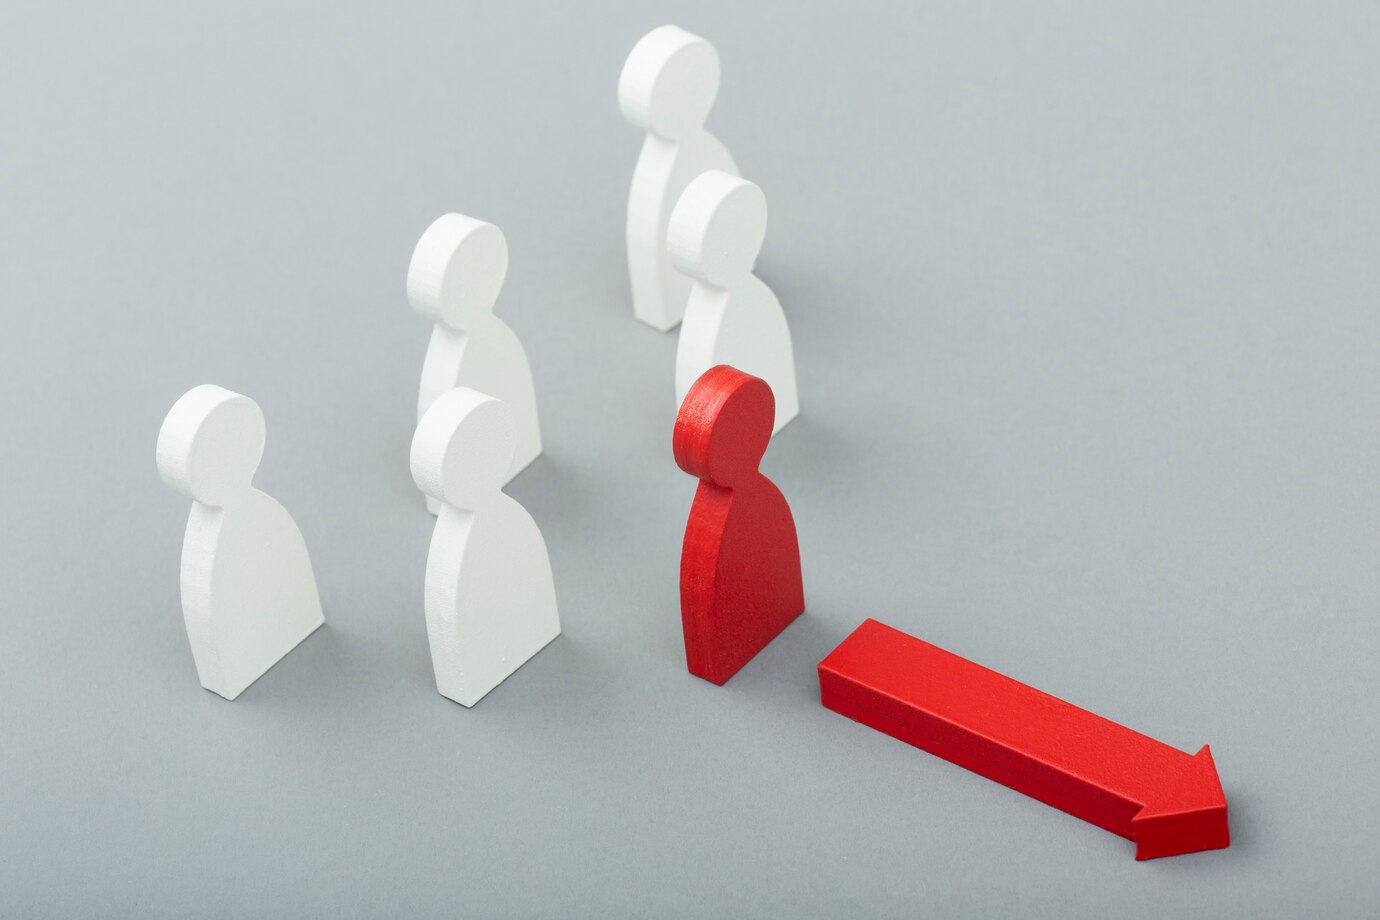 How to build leadership alignment